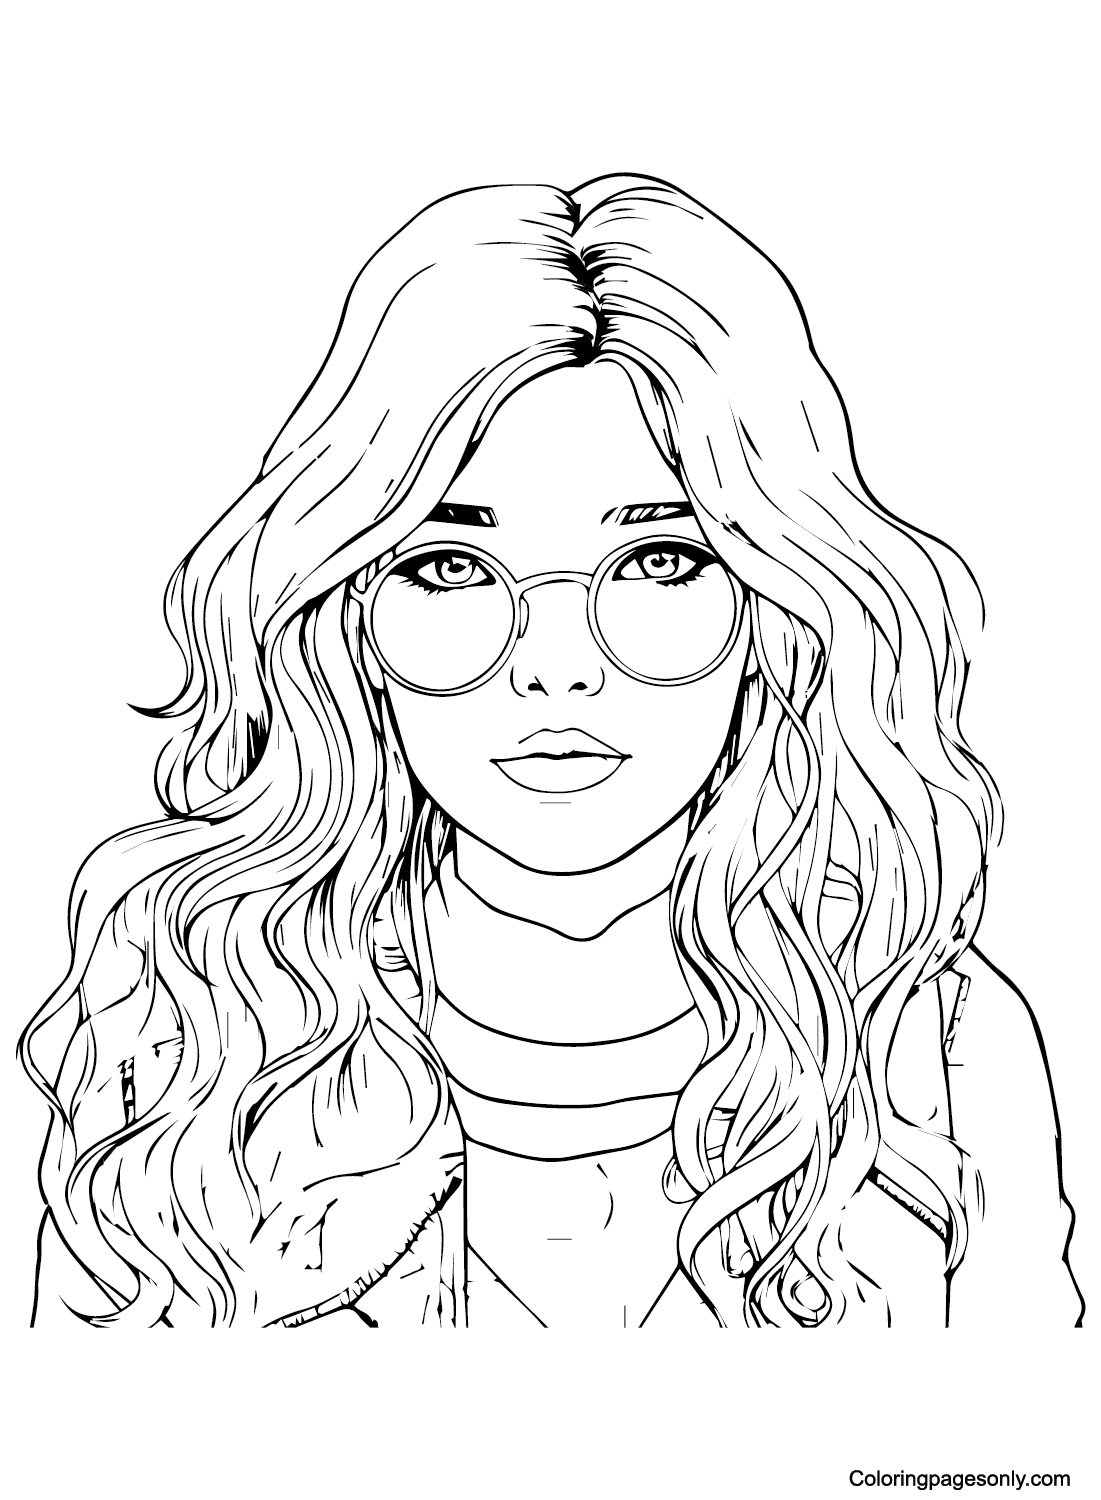 Print Teenage Girl Coloring Page - Free Printable Coloring Pages